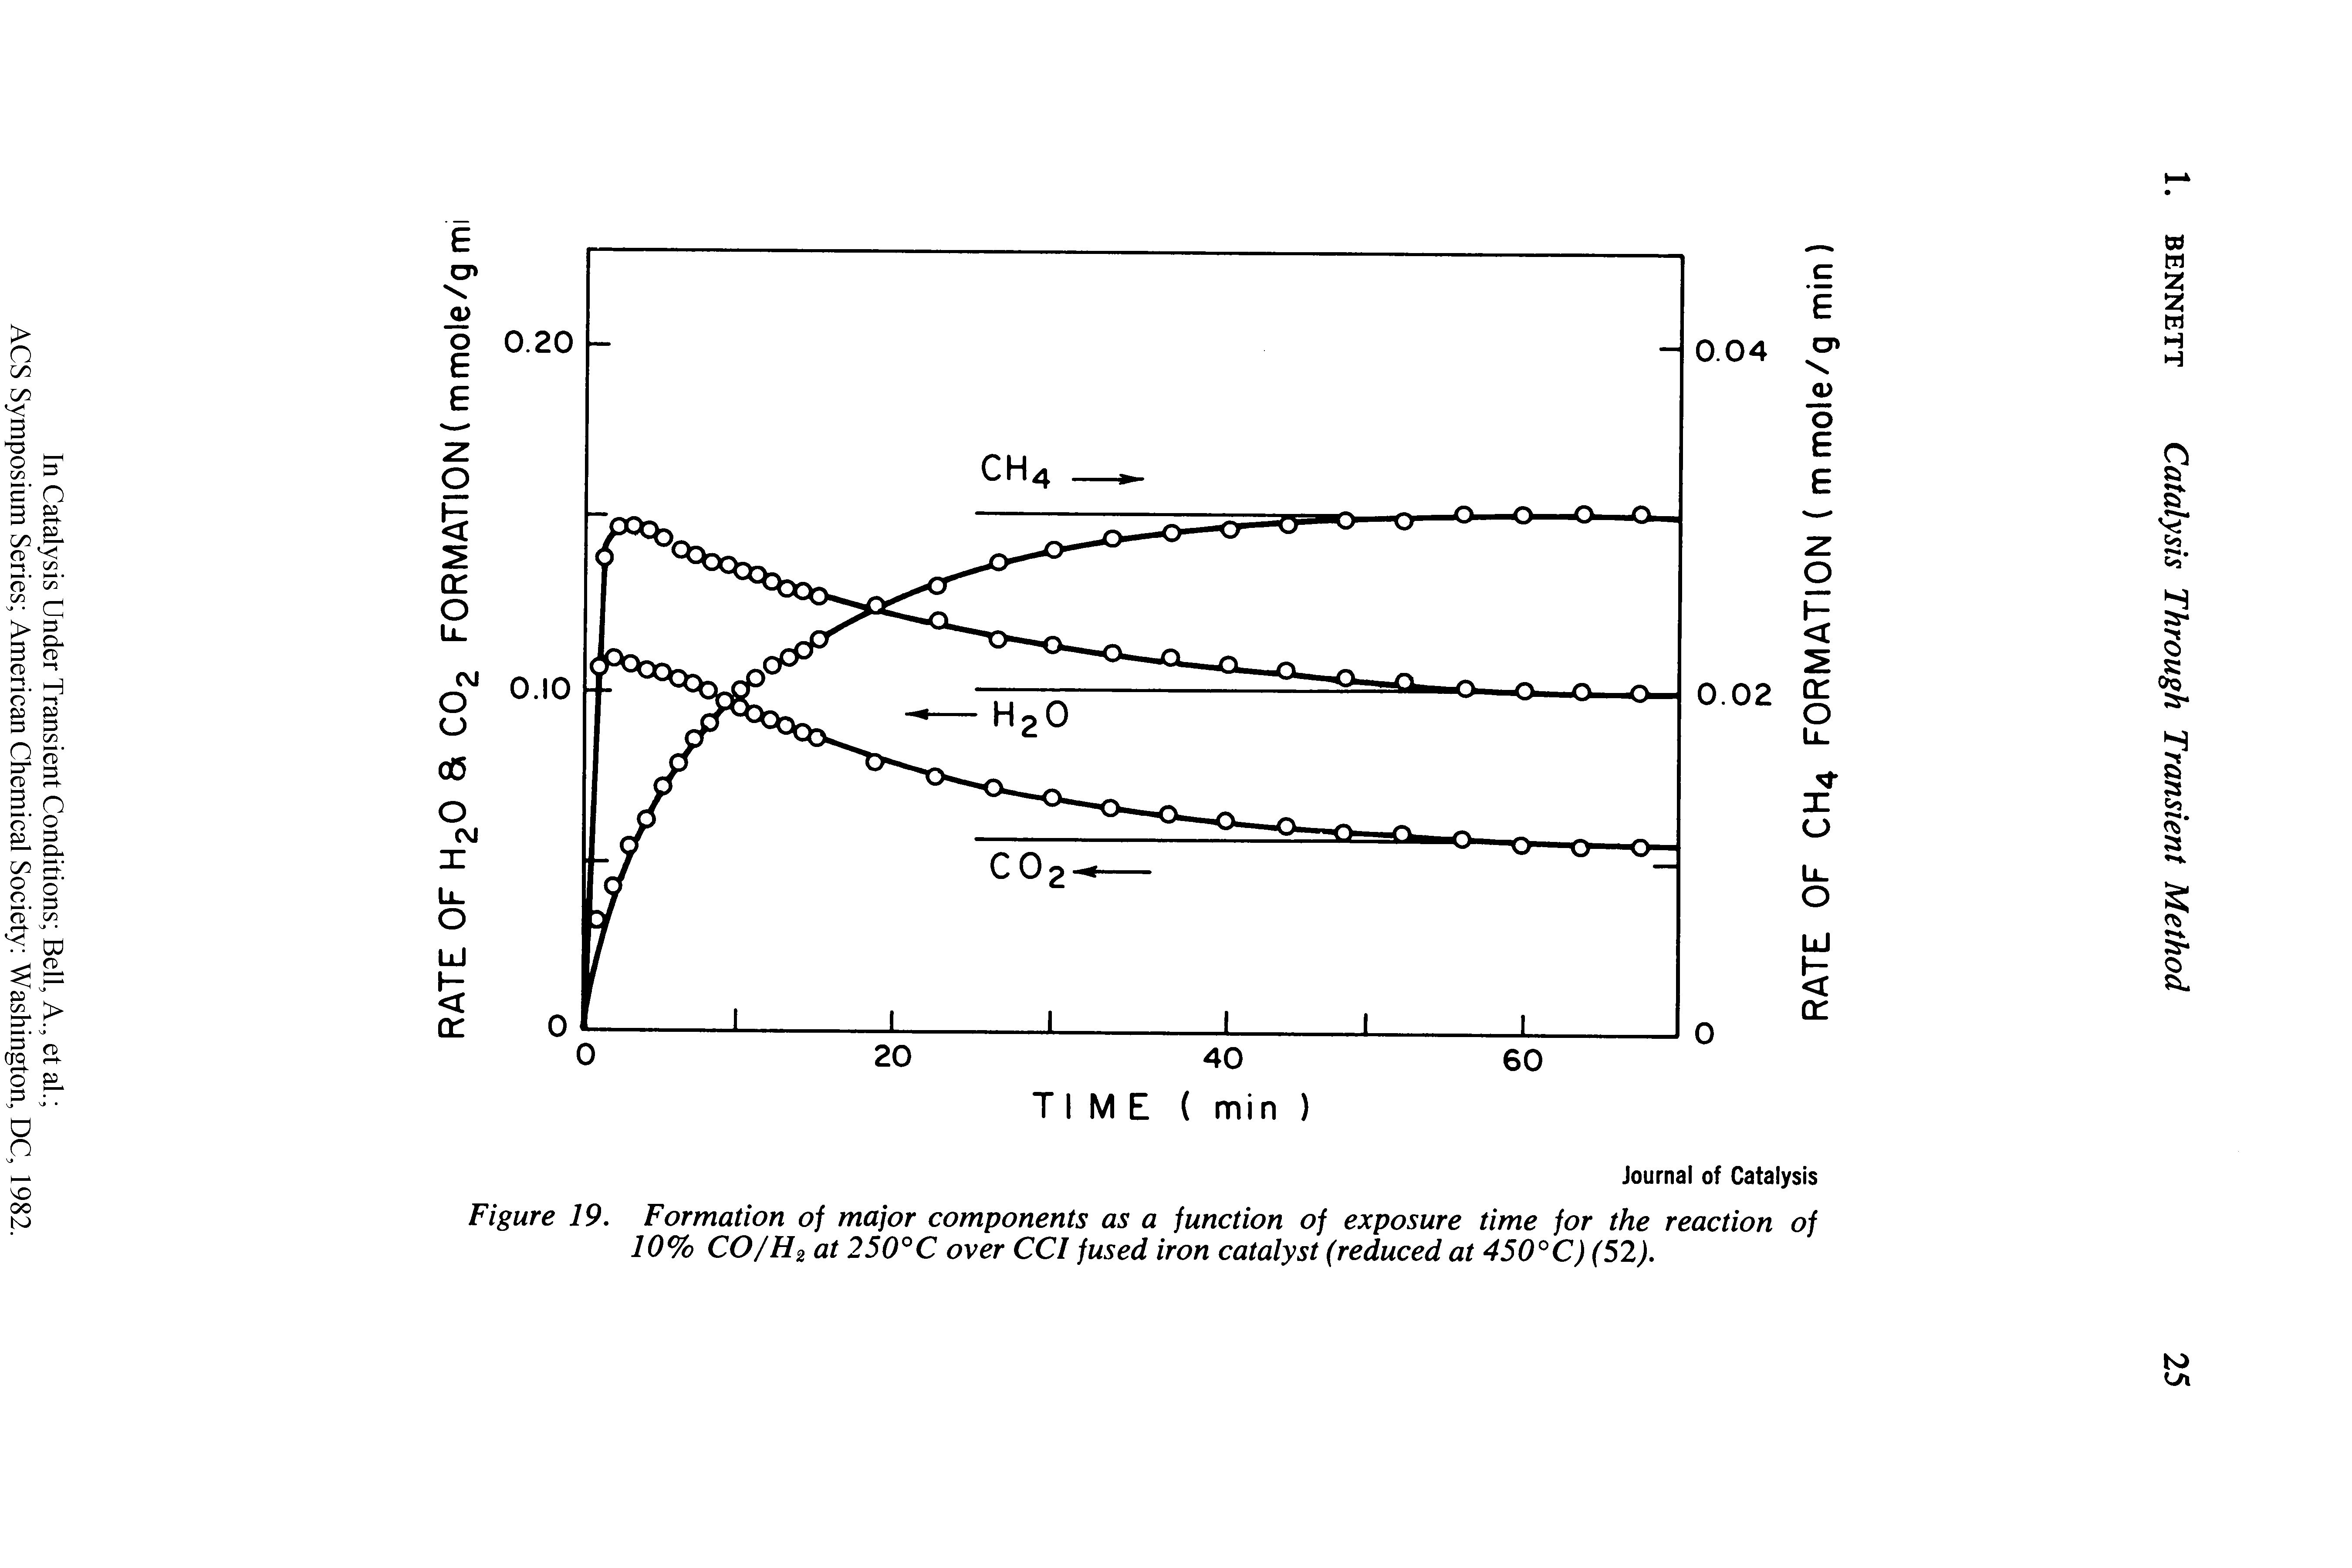 Figure 19. Formation of major components as a function of exposure time for the reaction of 10% CO/H2 at 250°C over CCI fused iron catalyst (reduced at 450°C) (52).